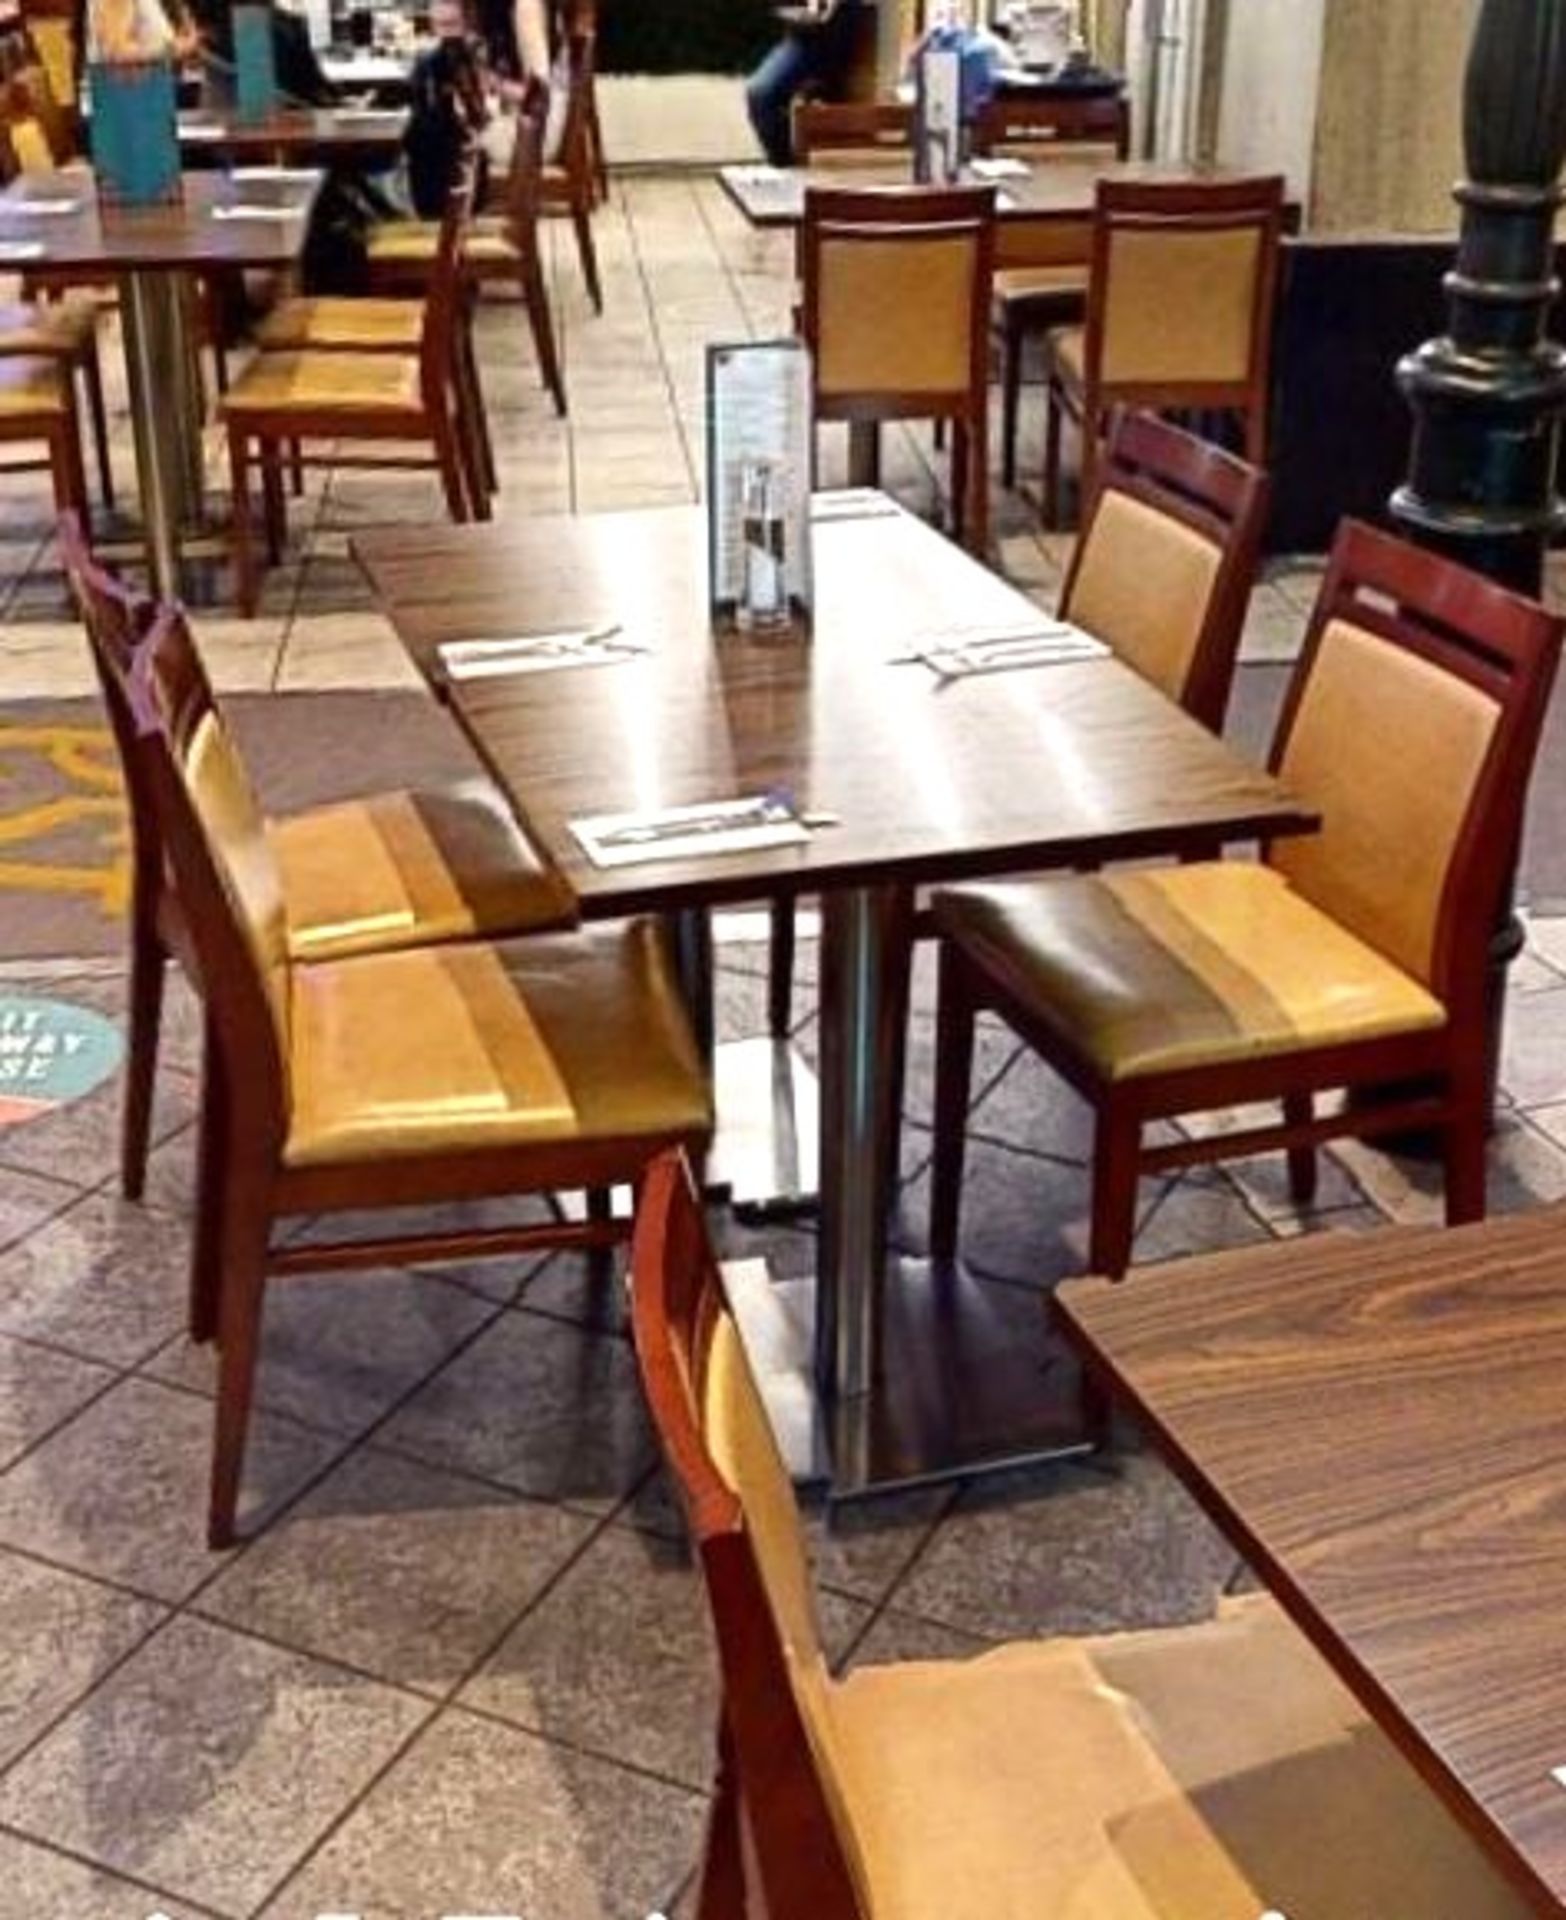 4 x Two Person Restaurant Dining Tables Featuring Chrome Pedestals and Tops With a Walnut Finish - Image 3 of 4